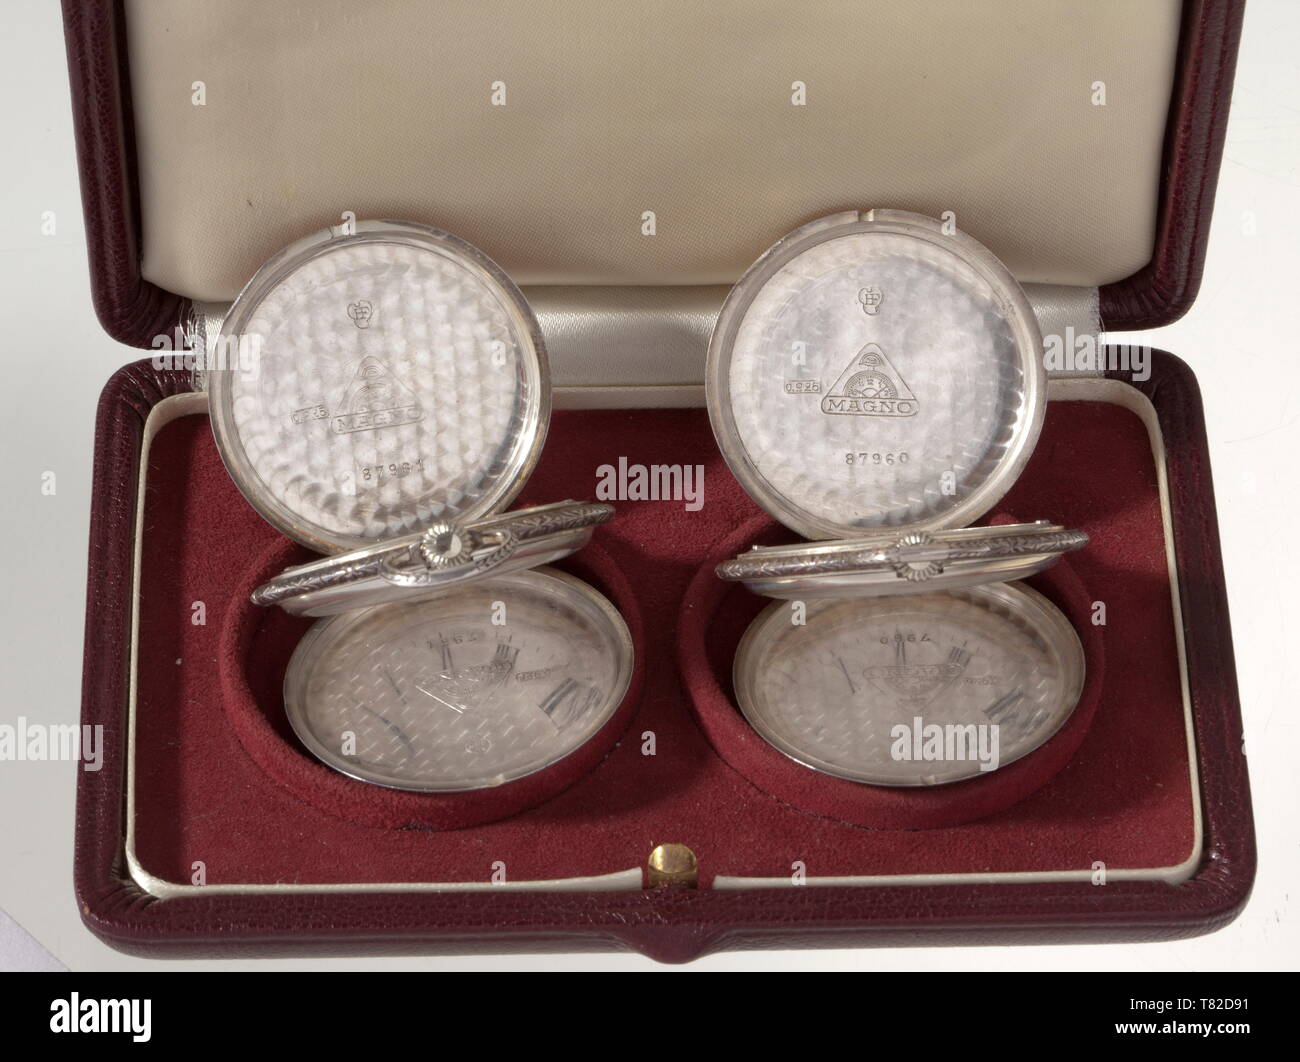 Walter Stennes (1895 - 1989) - Ernst Ramm. Two presentation pocket watches from the Koumintang military advisor to the head of the German consulate. The watches made of silver. The hunter cases inlaid with enamel and portraits of Chaing Kai-Shek, a motto scroll, and dragon decoration (minimal damage to the enamel on both watches). The back covers inlaid with enamel flags of the Koumintang and the Republic of China. The inside of the covers with manufacturer's inscription 'Magno', '925', and various hallmarks. Chinese characters on the enamel dials. In the presentation case., Editorial-Use-Only Stock Photo